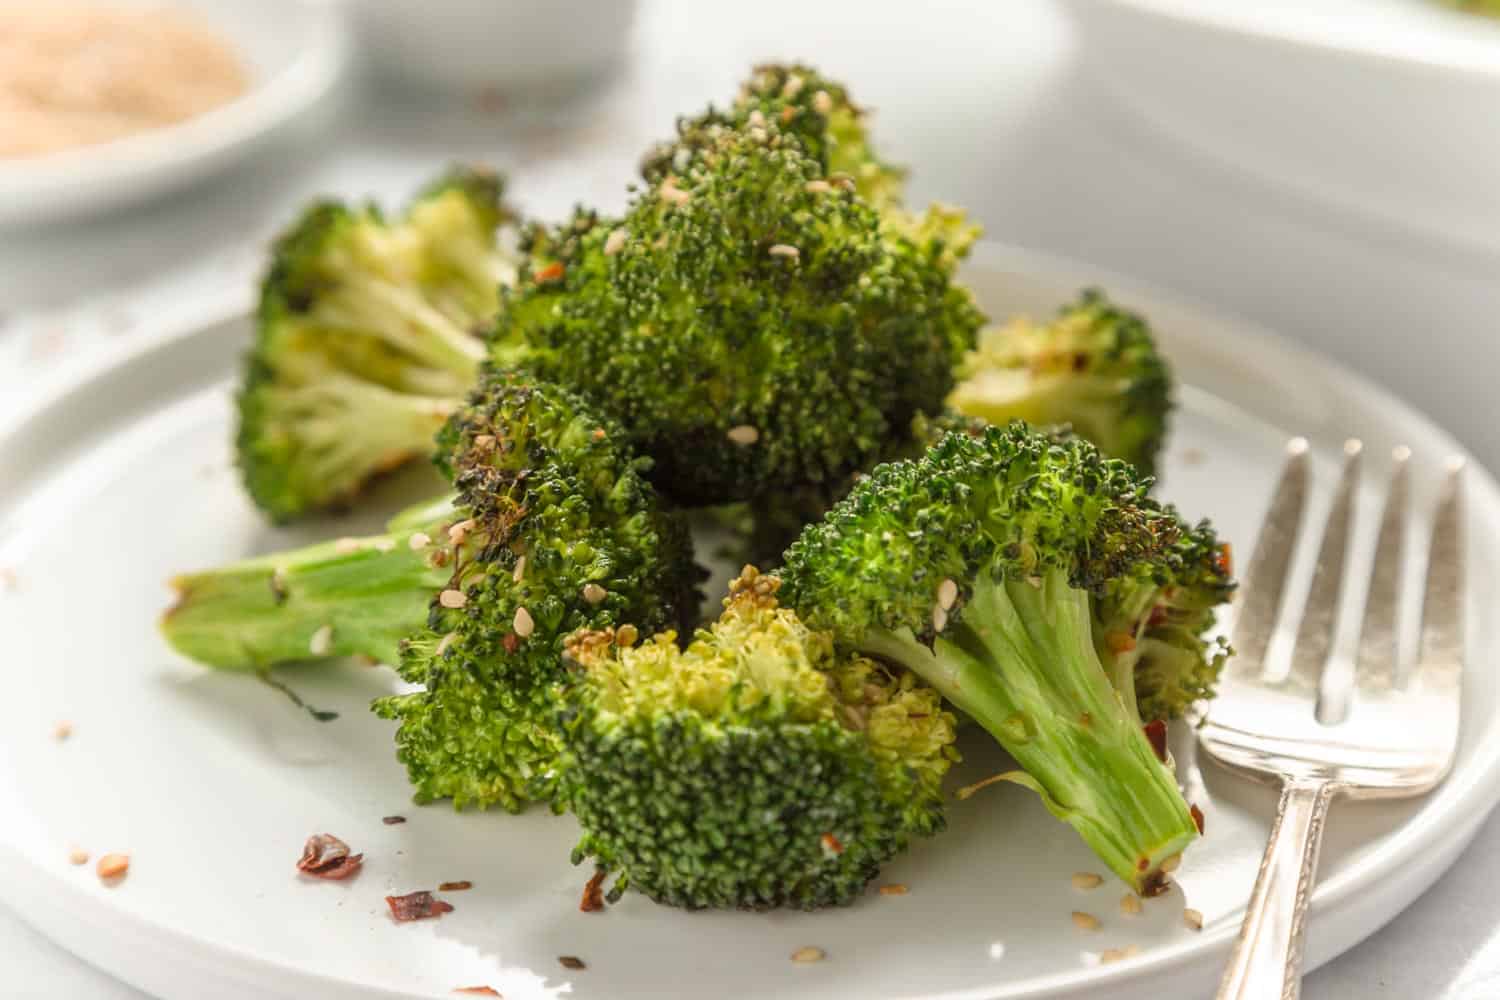 Air fried broccoli sprinkled with sesame seeds served on a white plate with a rustic fork